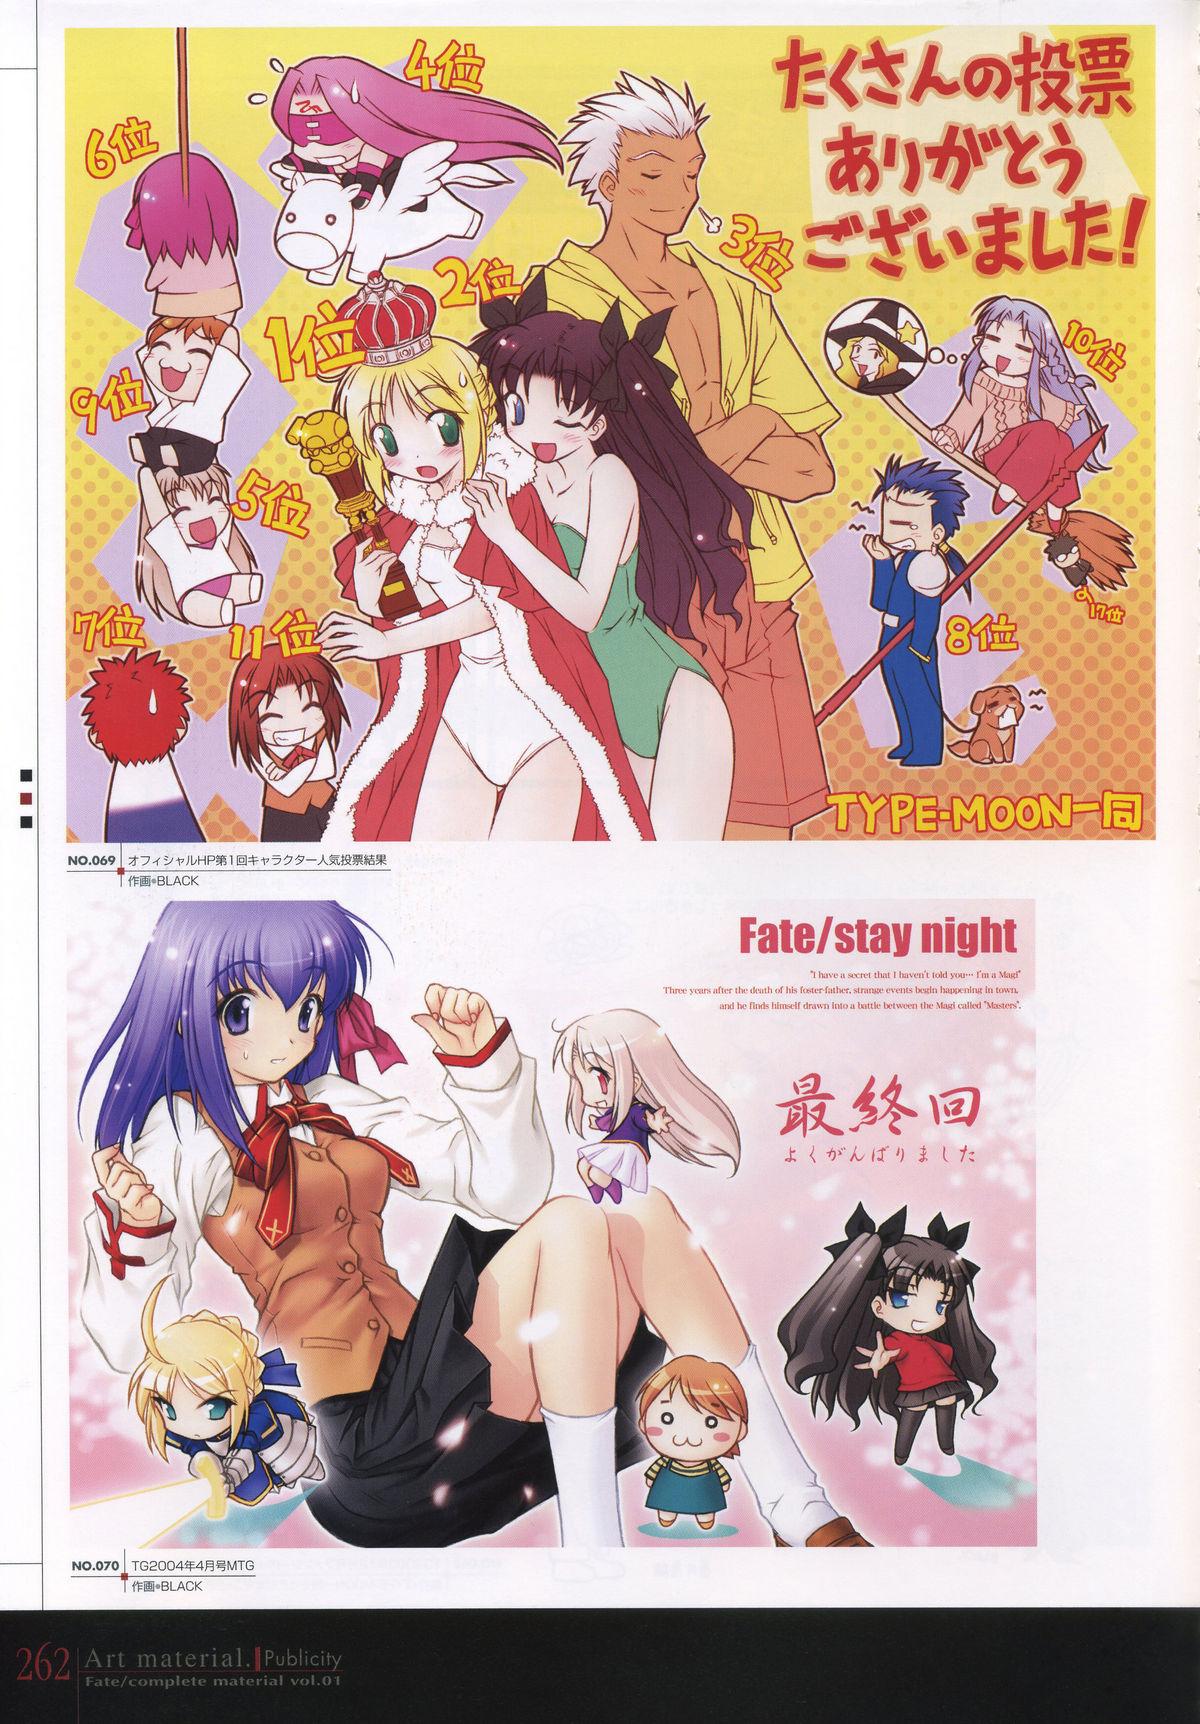 Fate/complete material I - Art material. 266